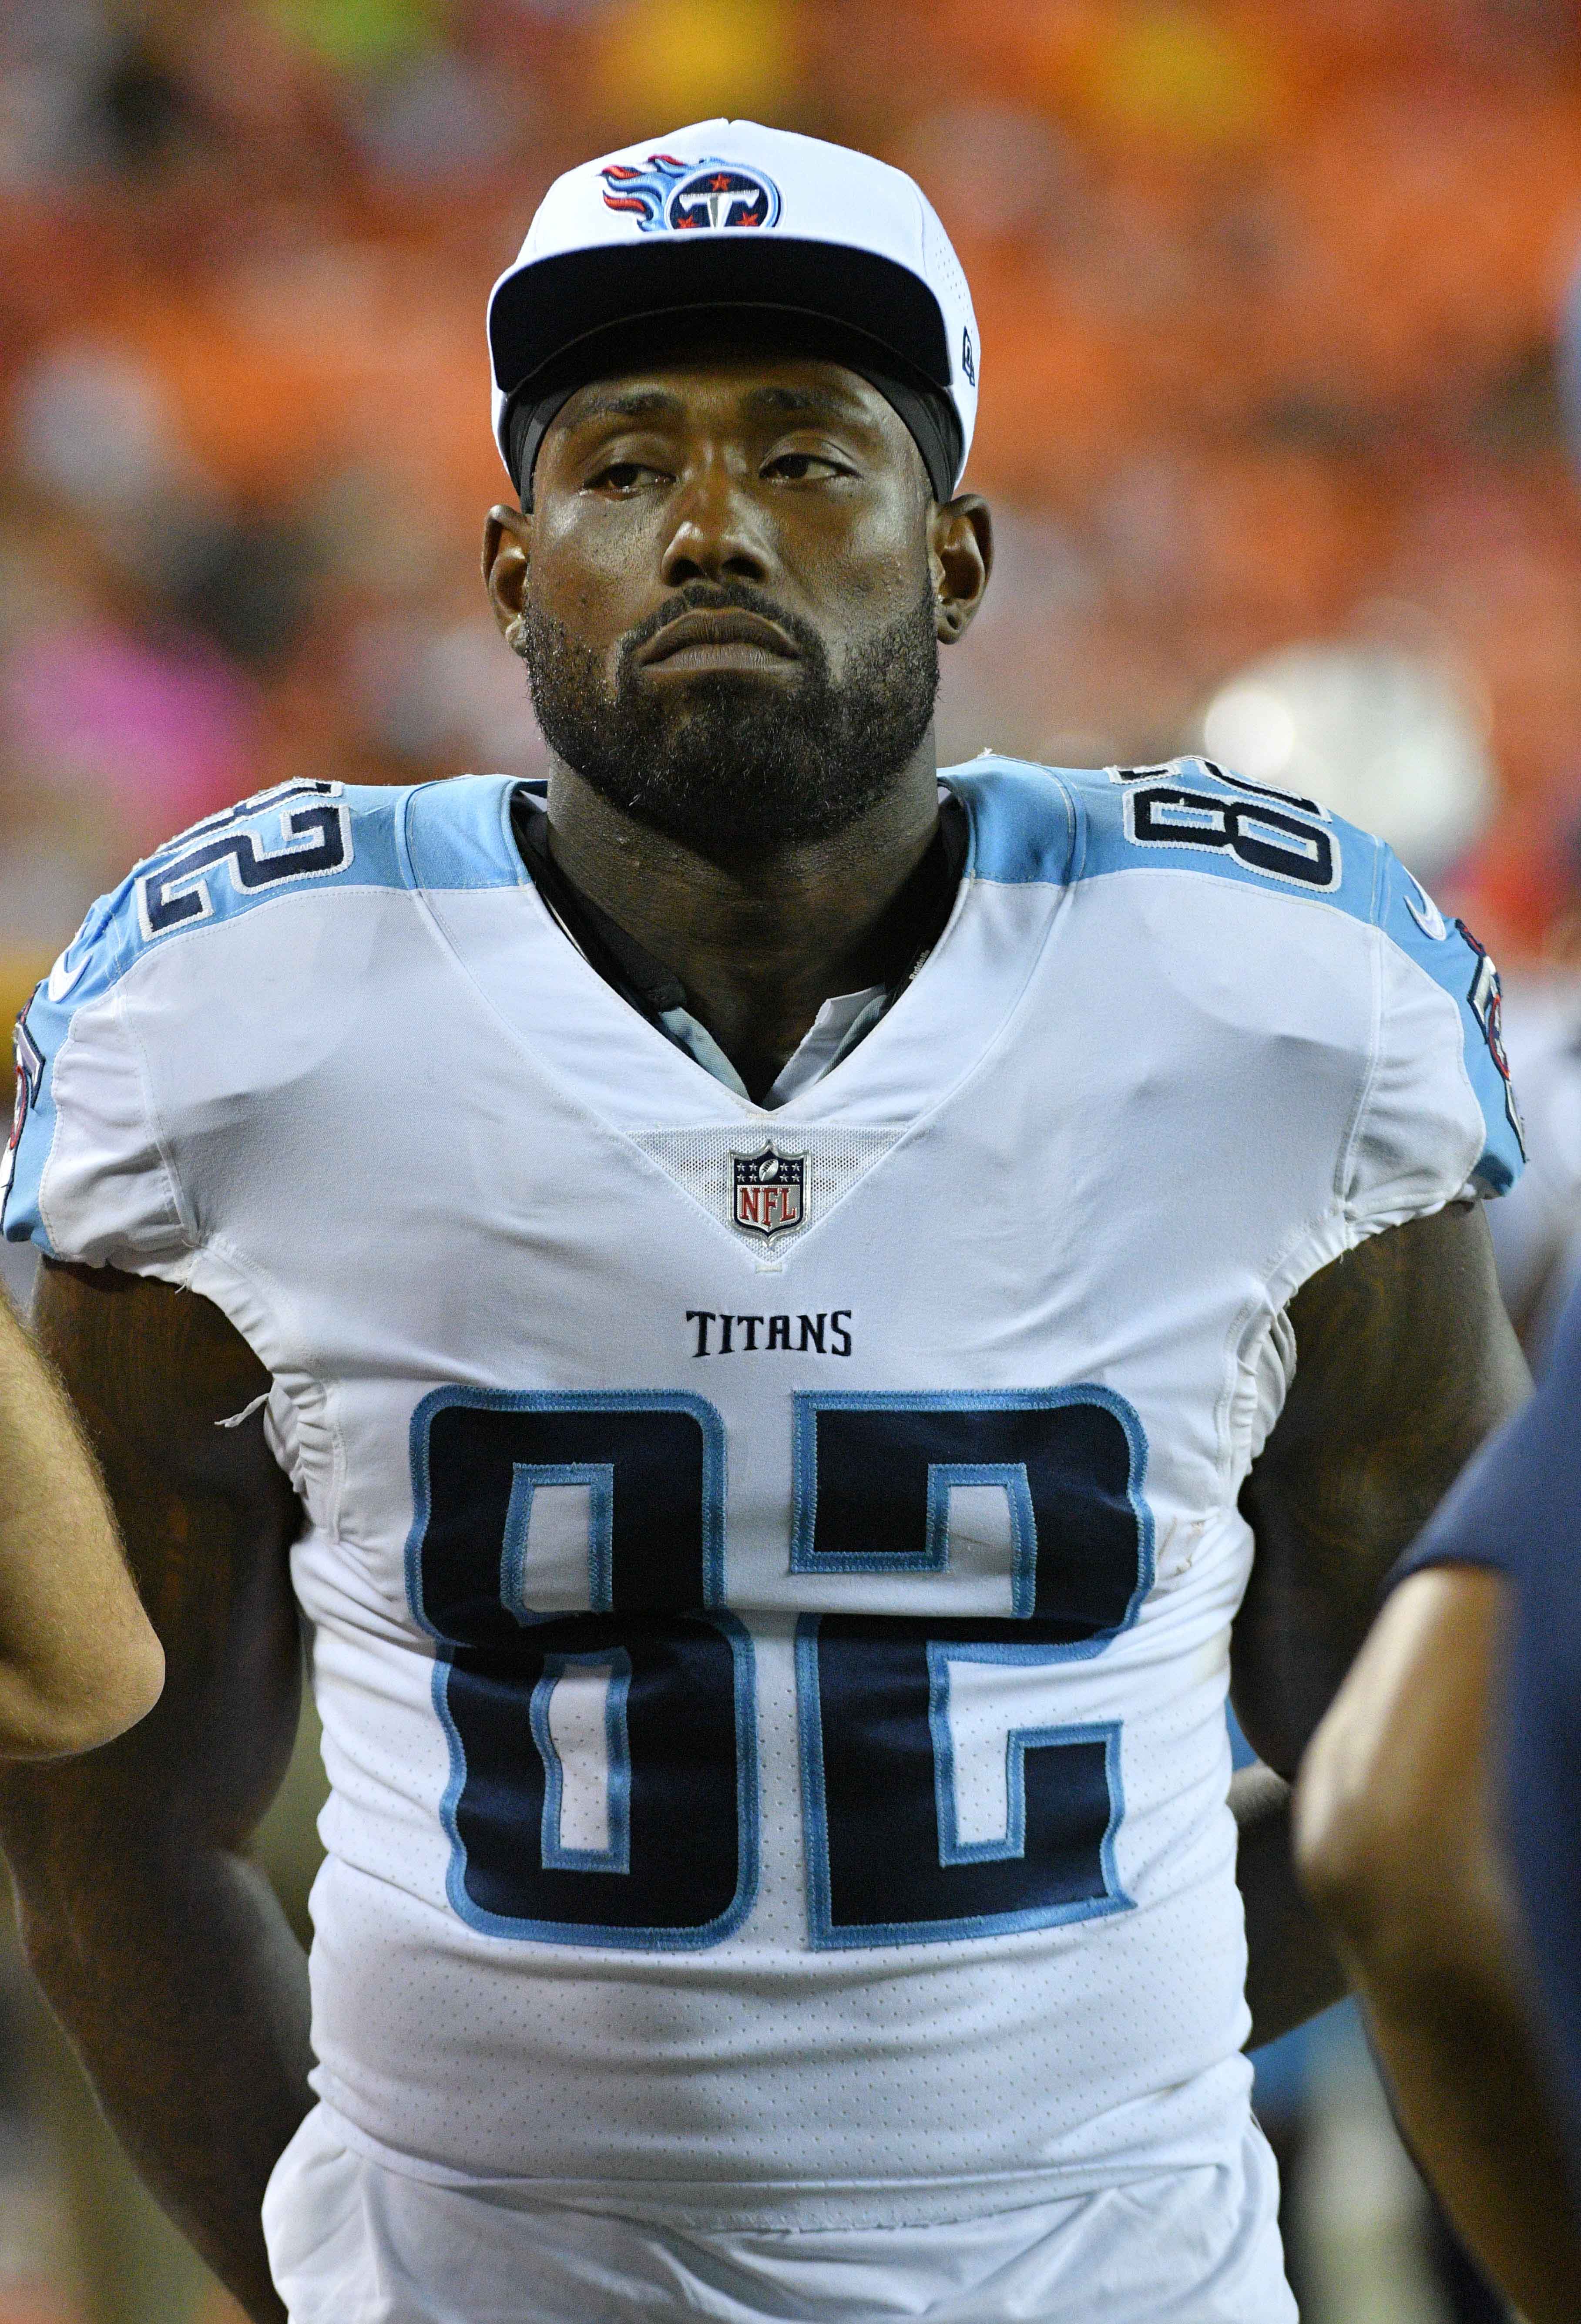 Titans' Delanie Walker, family received death threats since comments about national anthem